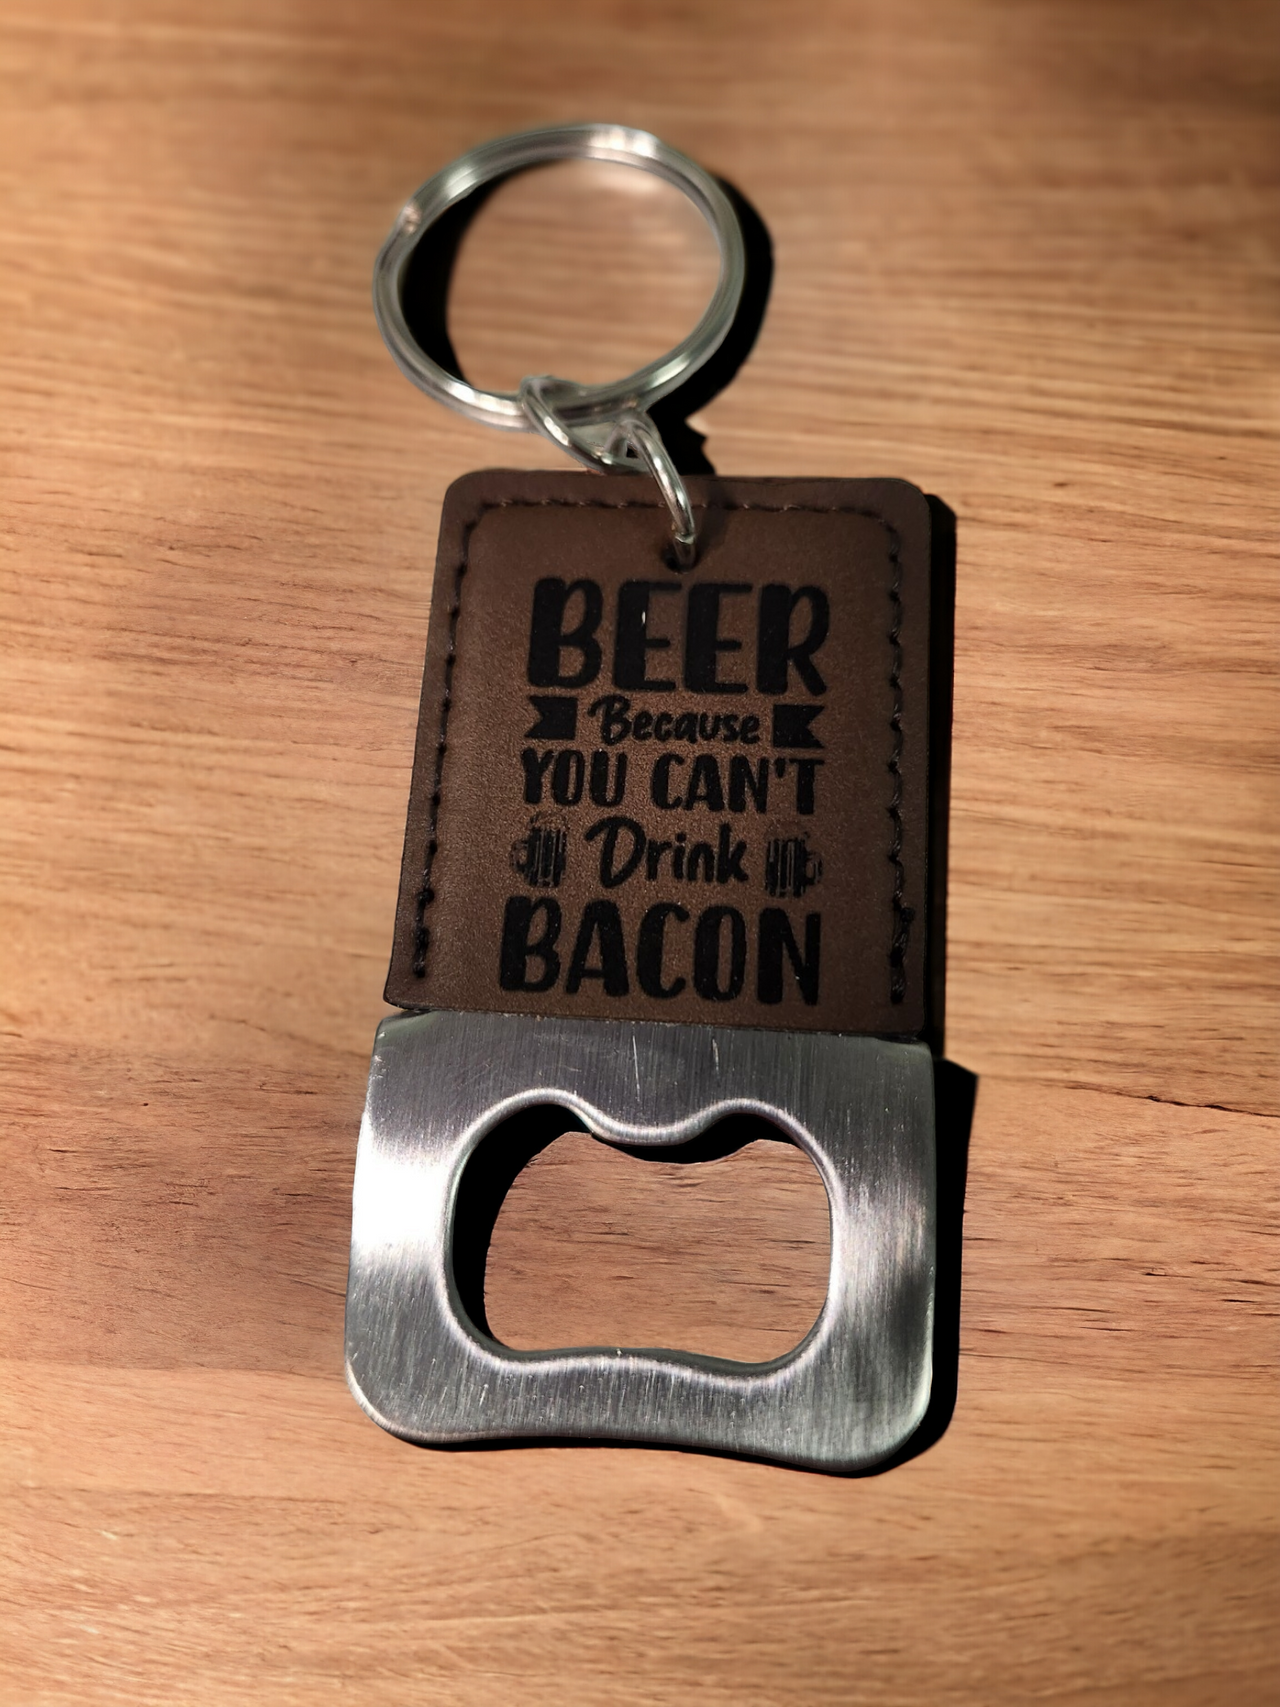 Beer Because You Can't Drink Bacon Bottle Opener Keychain - Engraved Leatherette Design